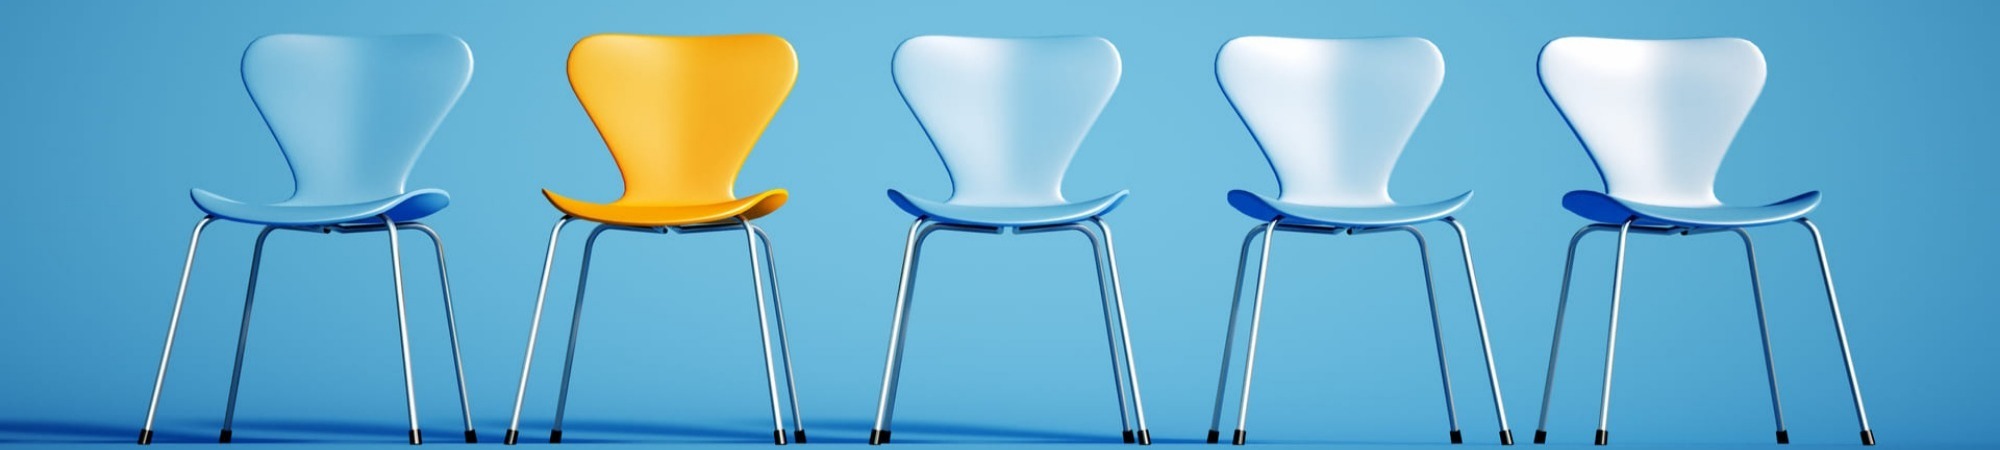 a row of blue chairs and a contrasting yellow one; indicating applicants awaiting a job interview